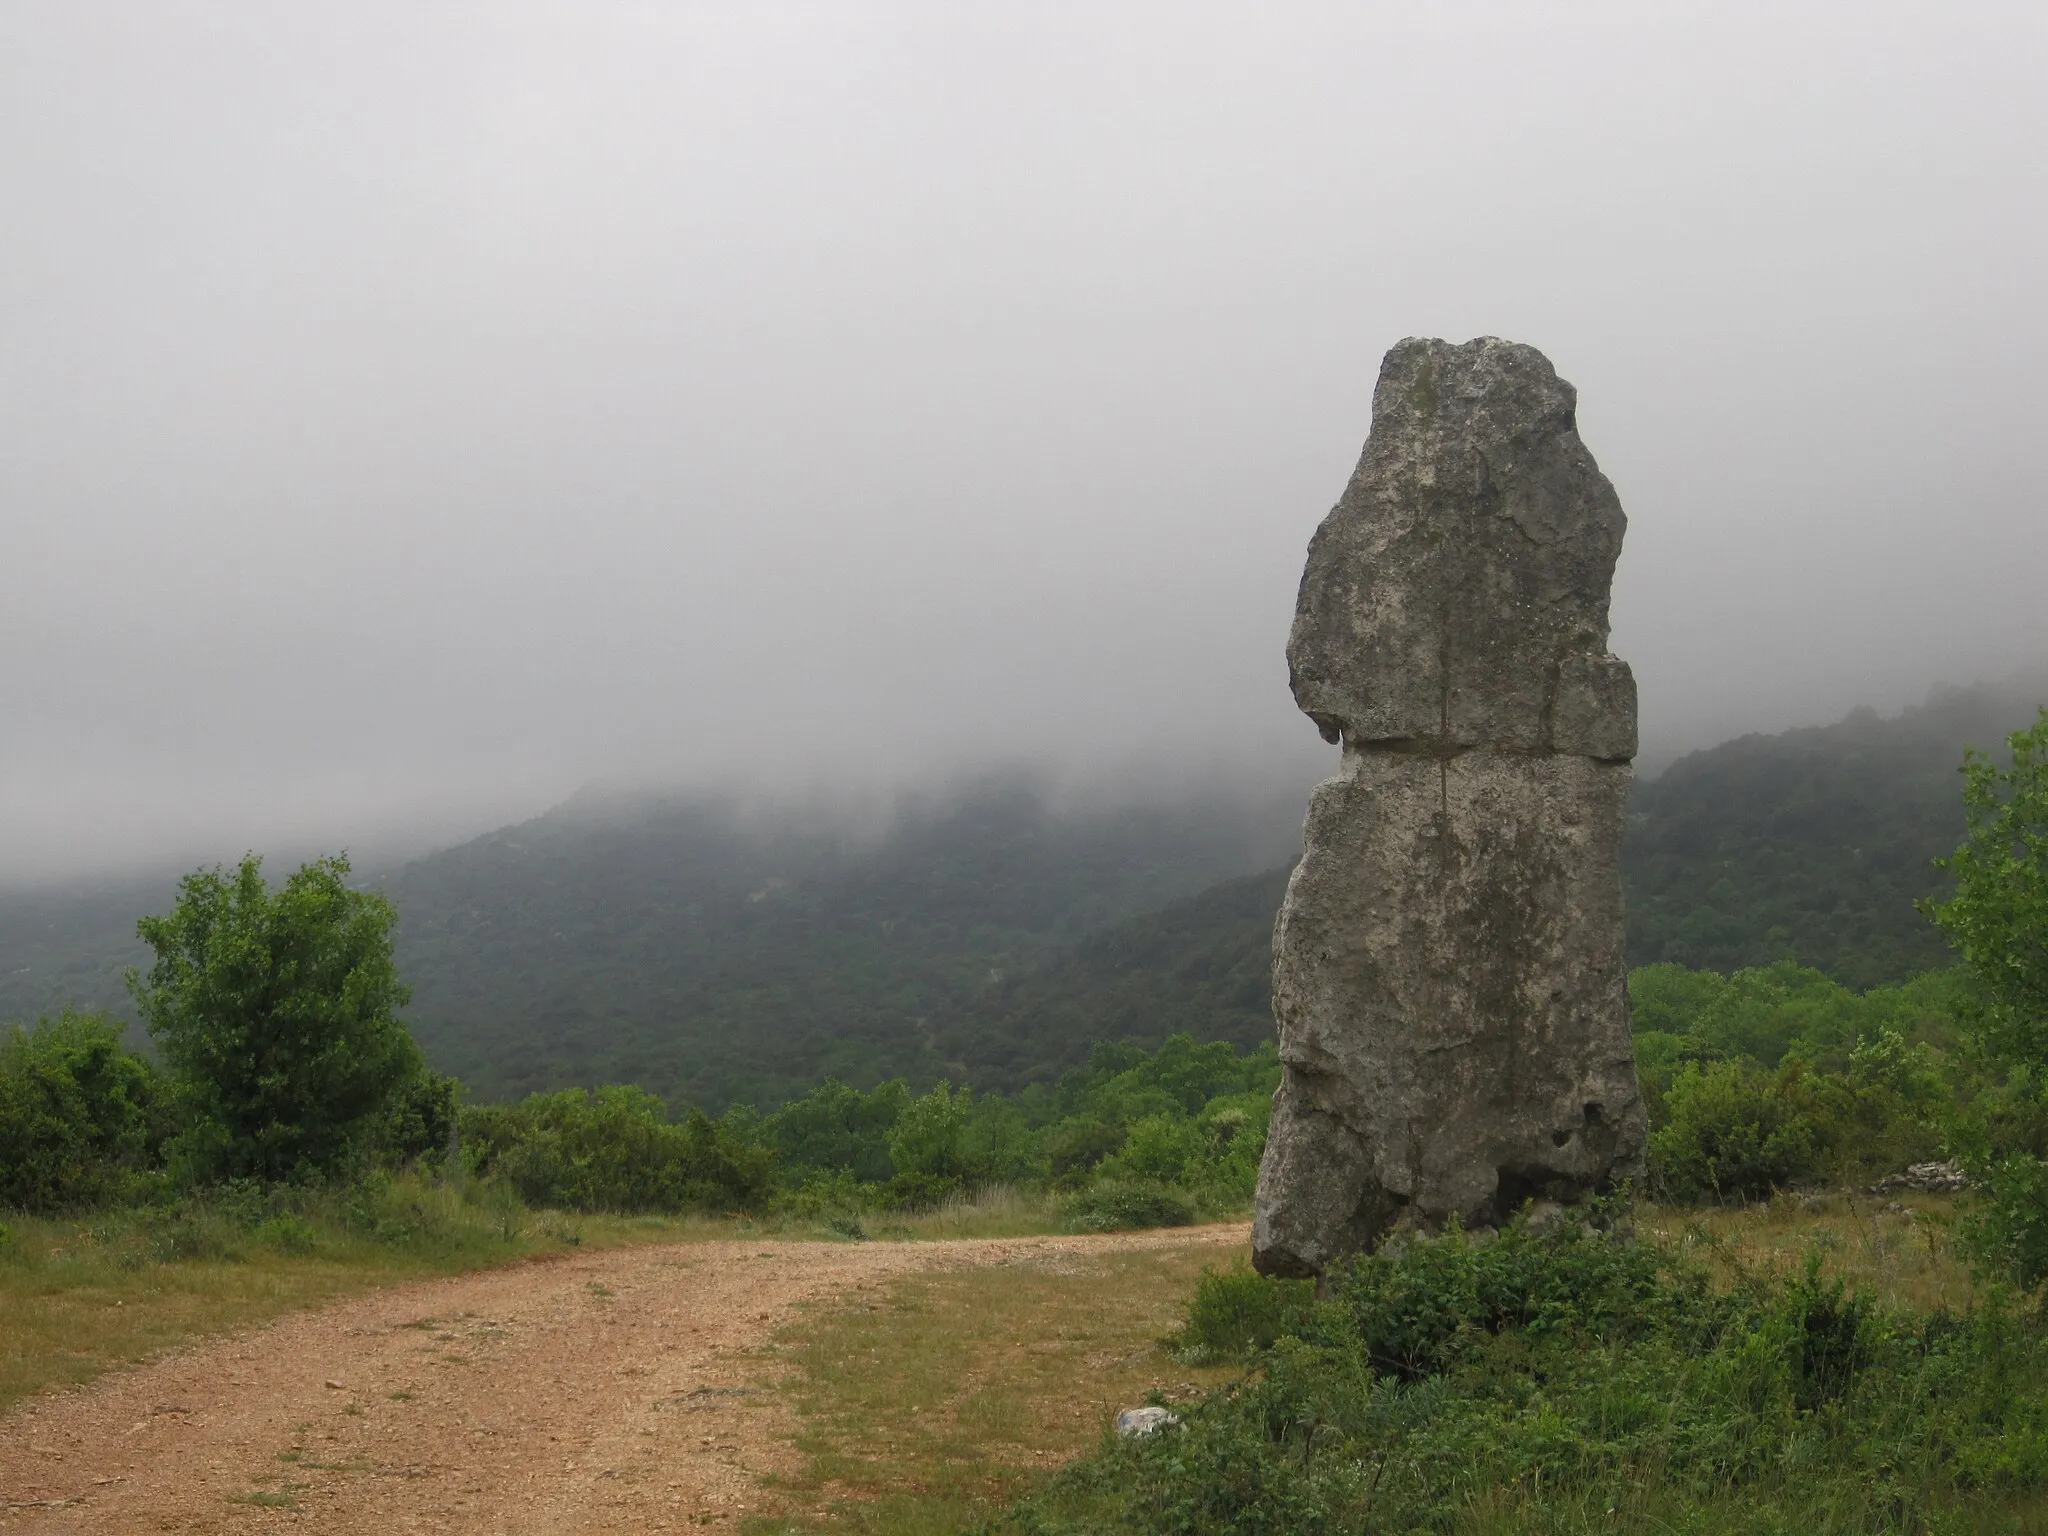 Photo showing: "Megalith of Lacam of the Lavagnes" located in the municipality of Saint-Guilhem-le-Désert (Hérault - France).